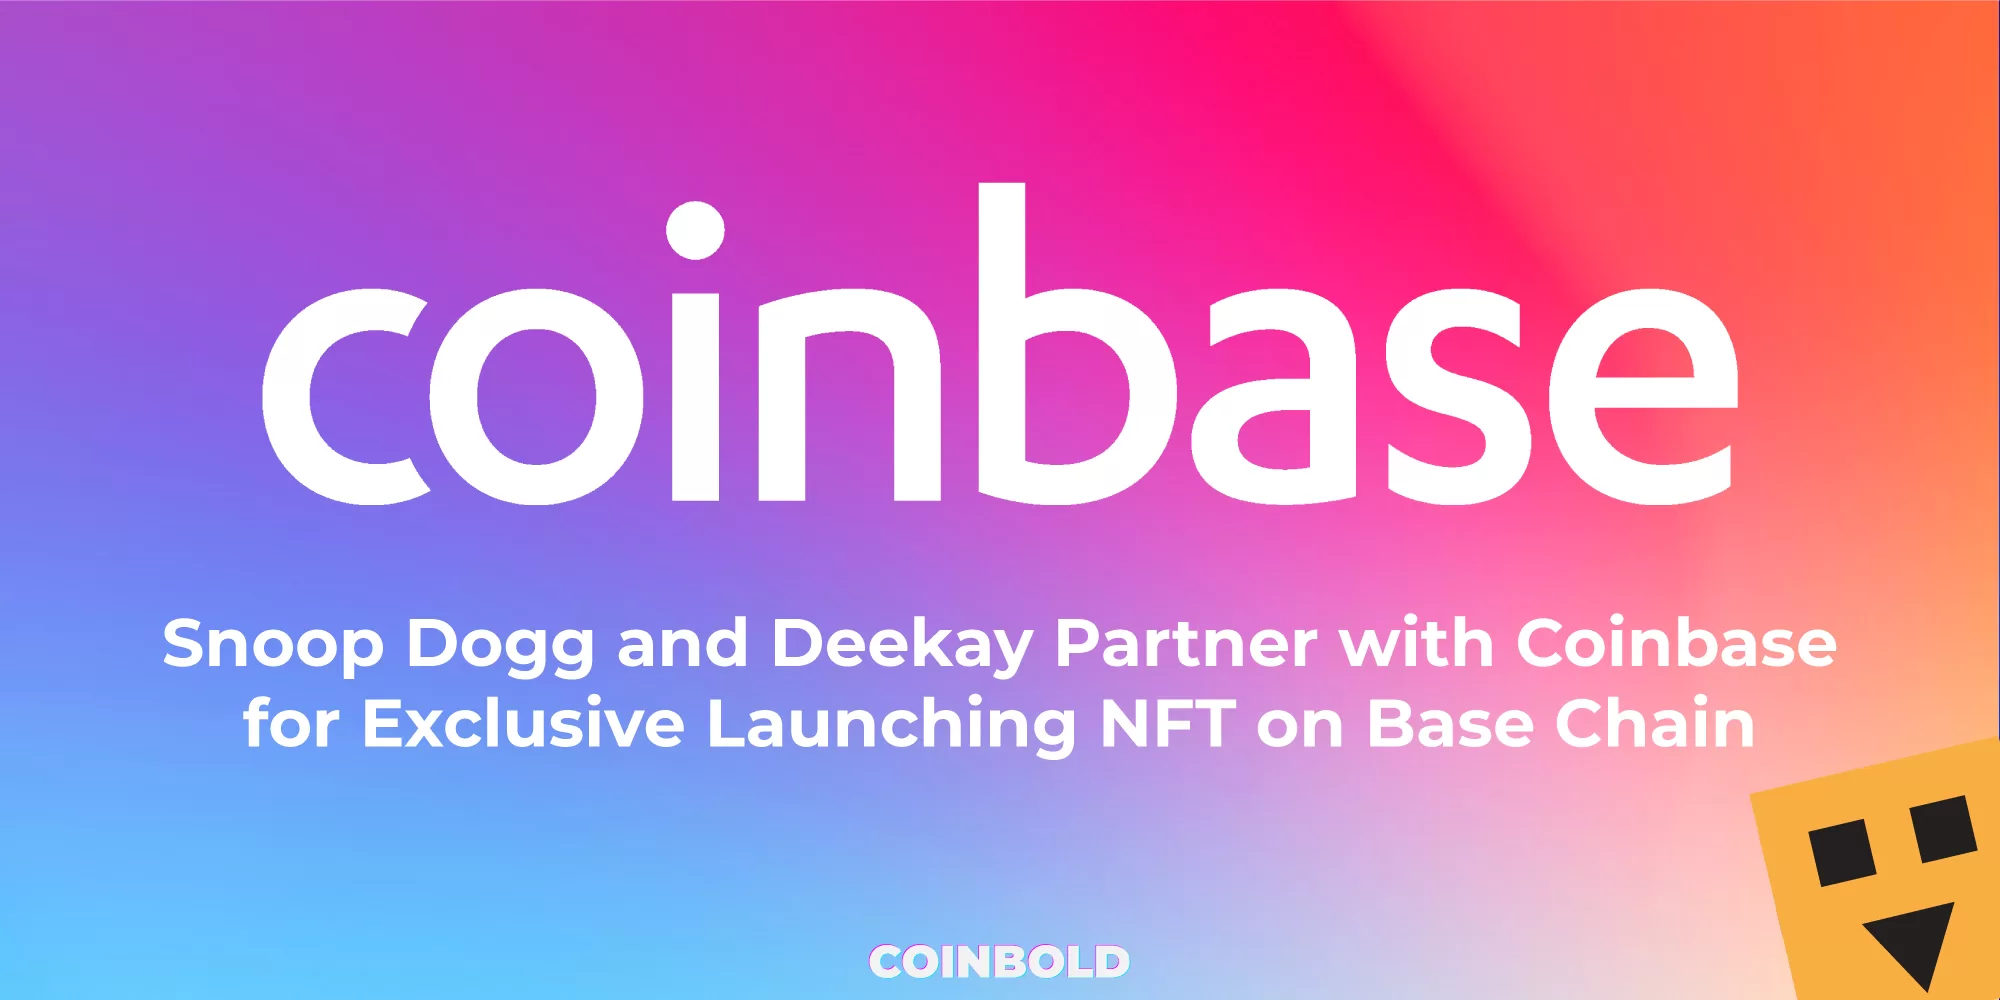 Snoop Dogg and Deekay Partner with Coinbase for Exclusive Launching NFT on Base Chain